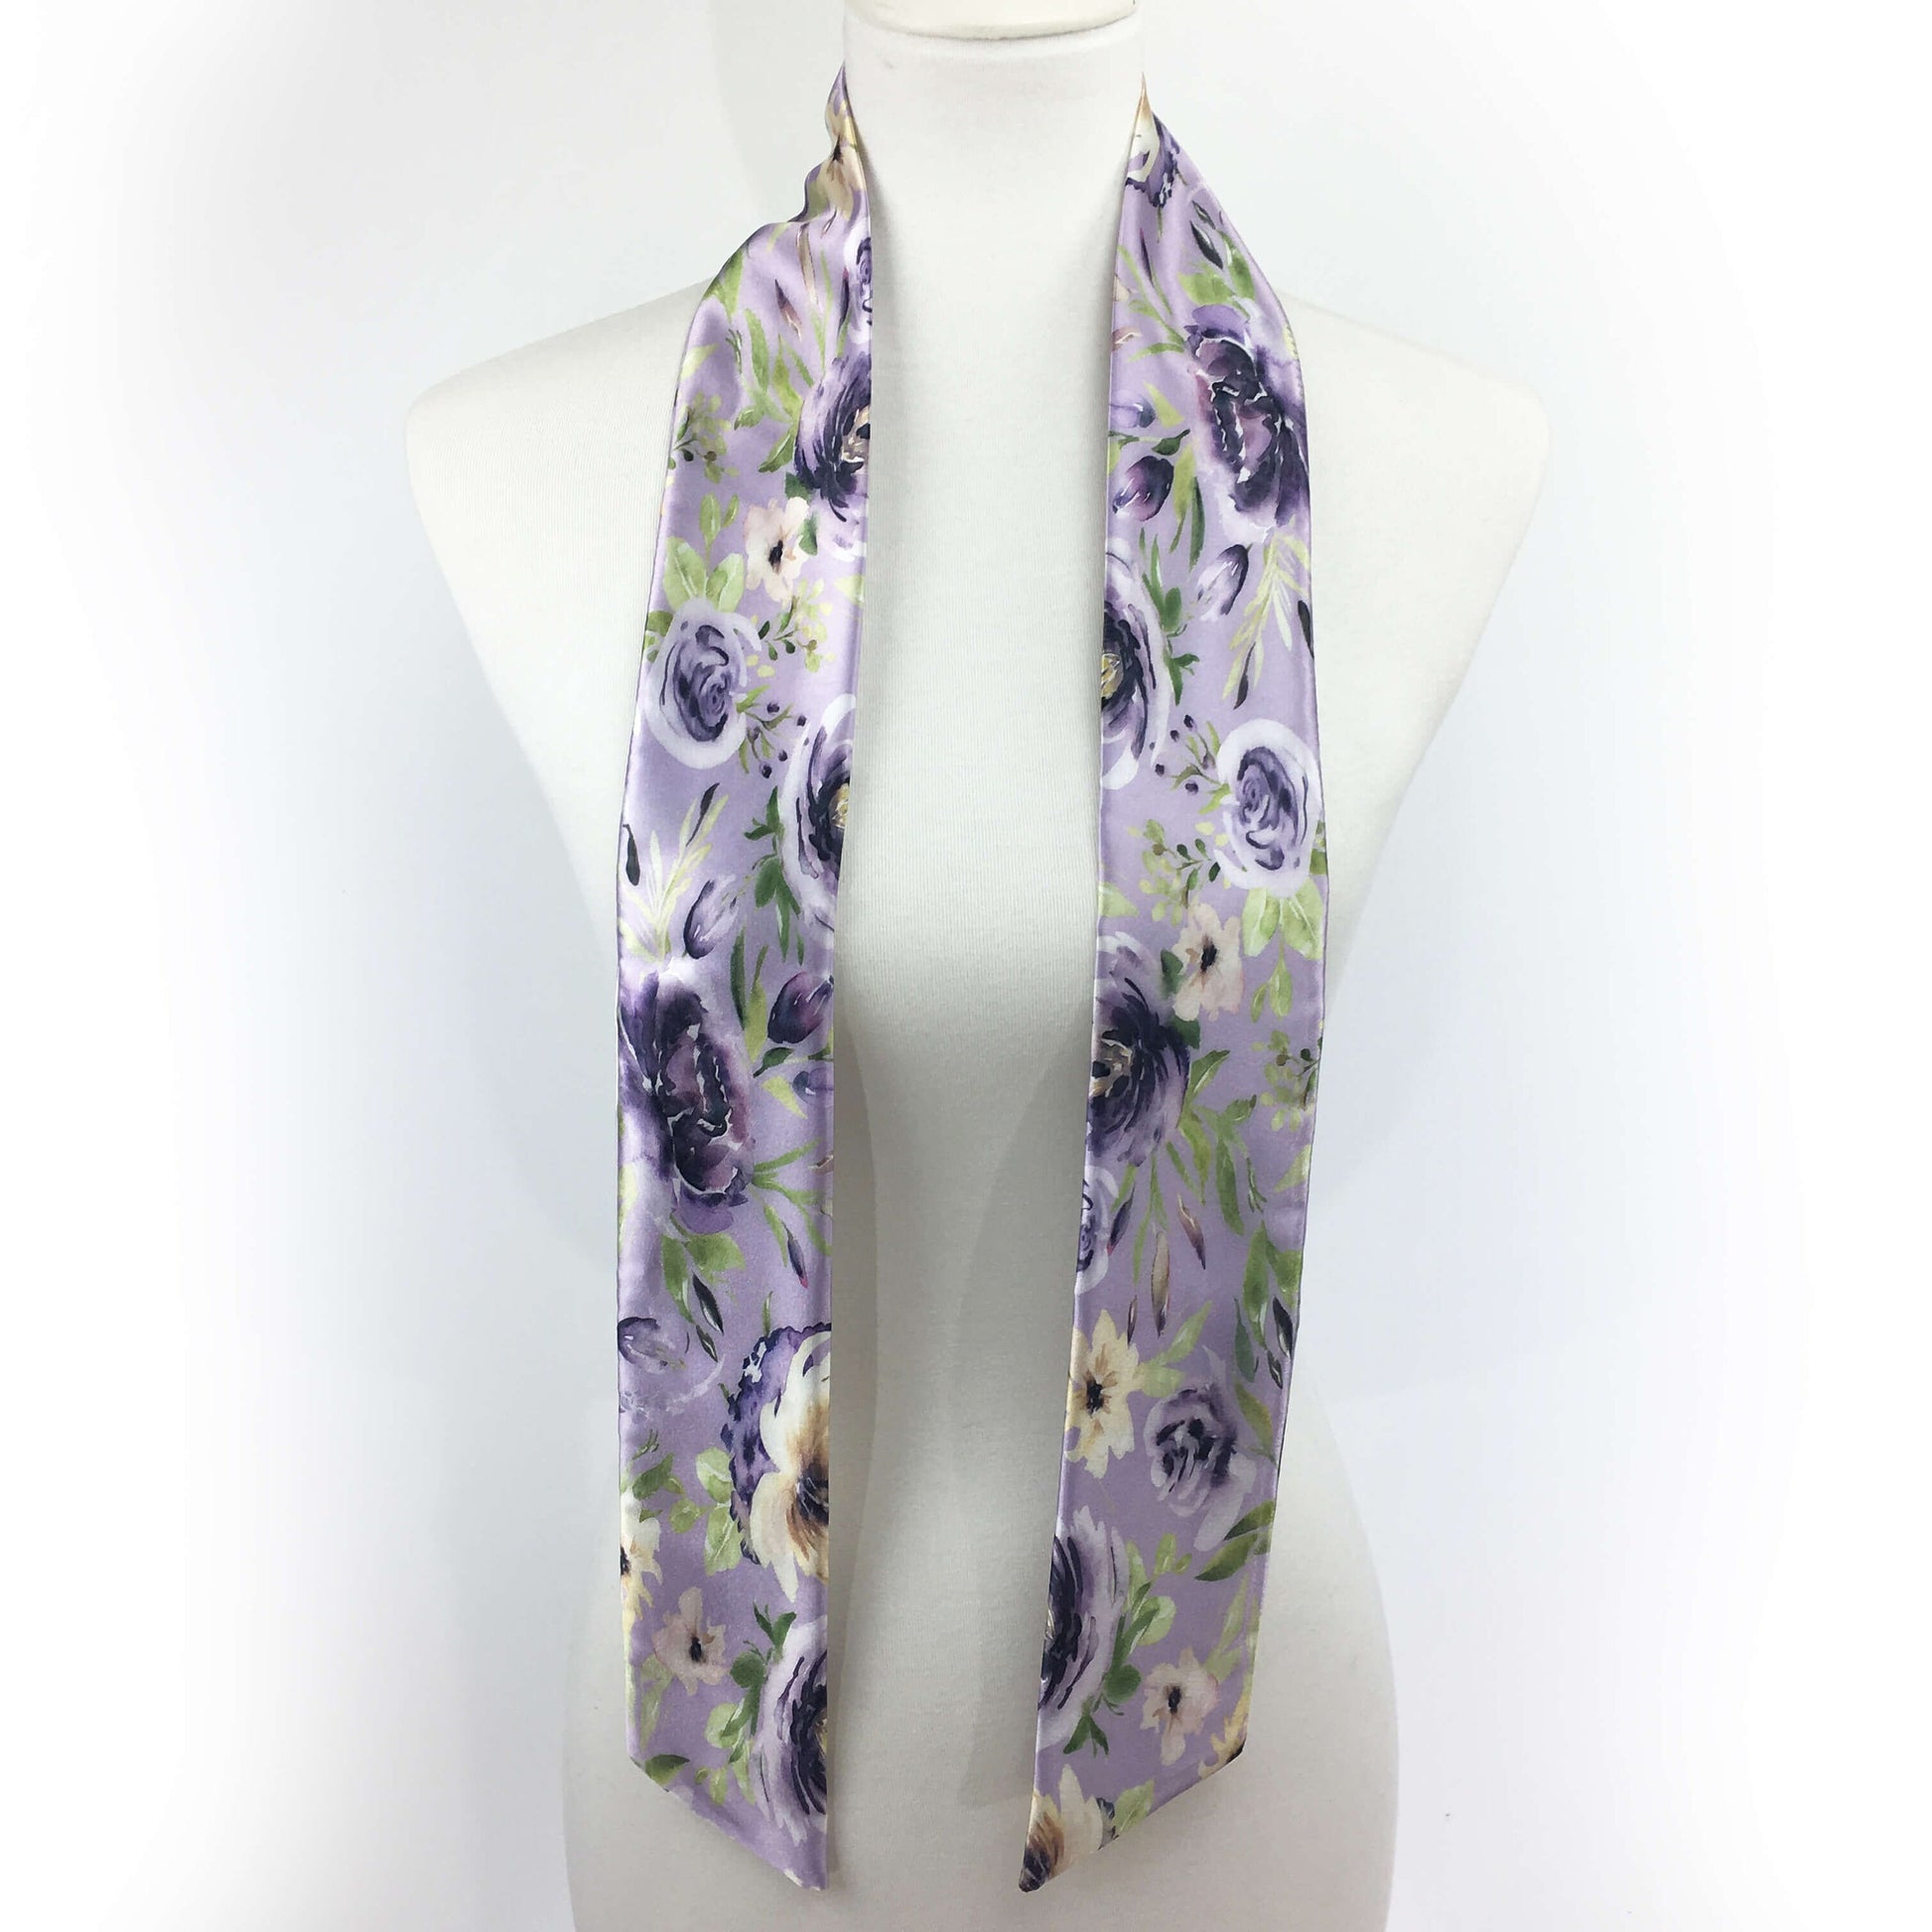 Mixed Watercolor Lavender,Skinny Scarf,Woman Scarf,All season scarf,LightweightScarf,ladies scarf,artist scarf,painted scarf,satin tie scarf